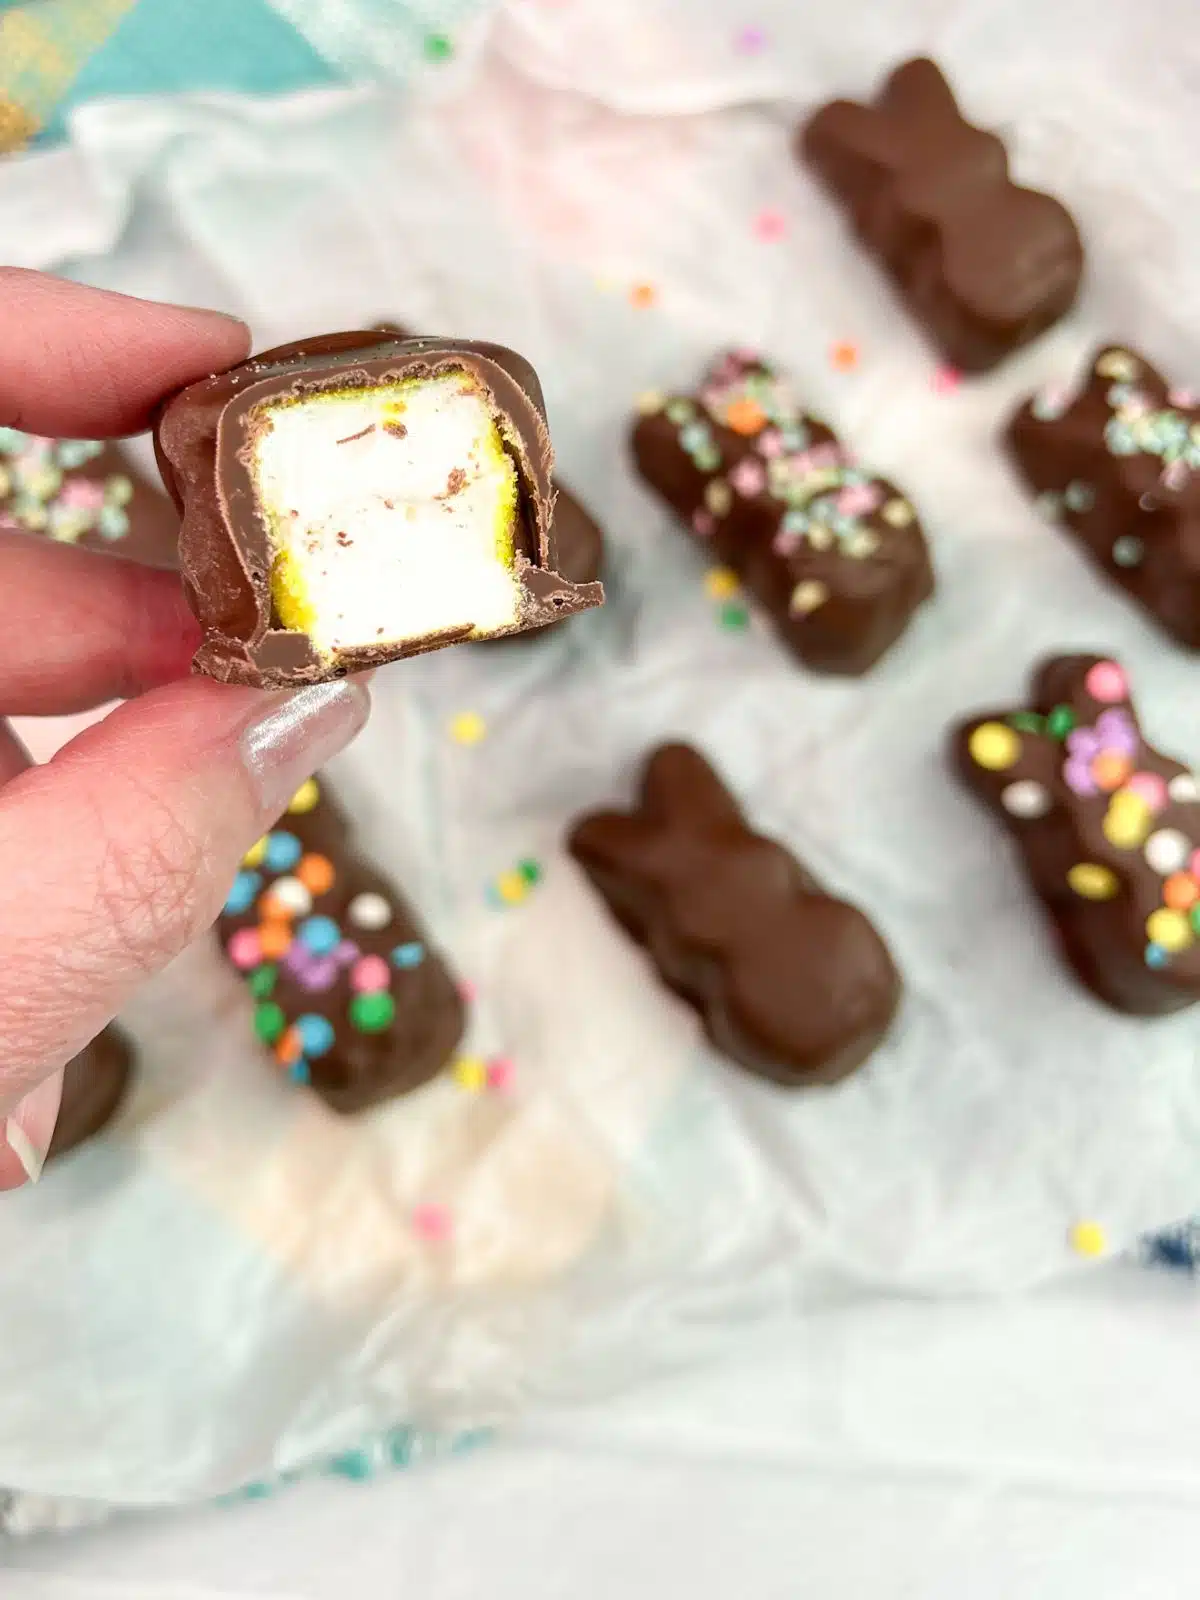 inside view of chocolate covered marshmallow Peep.